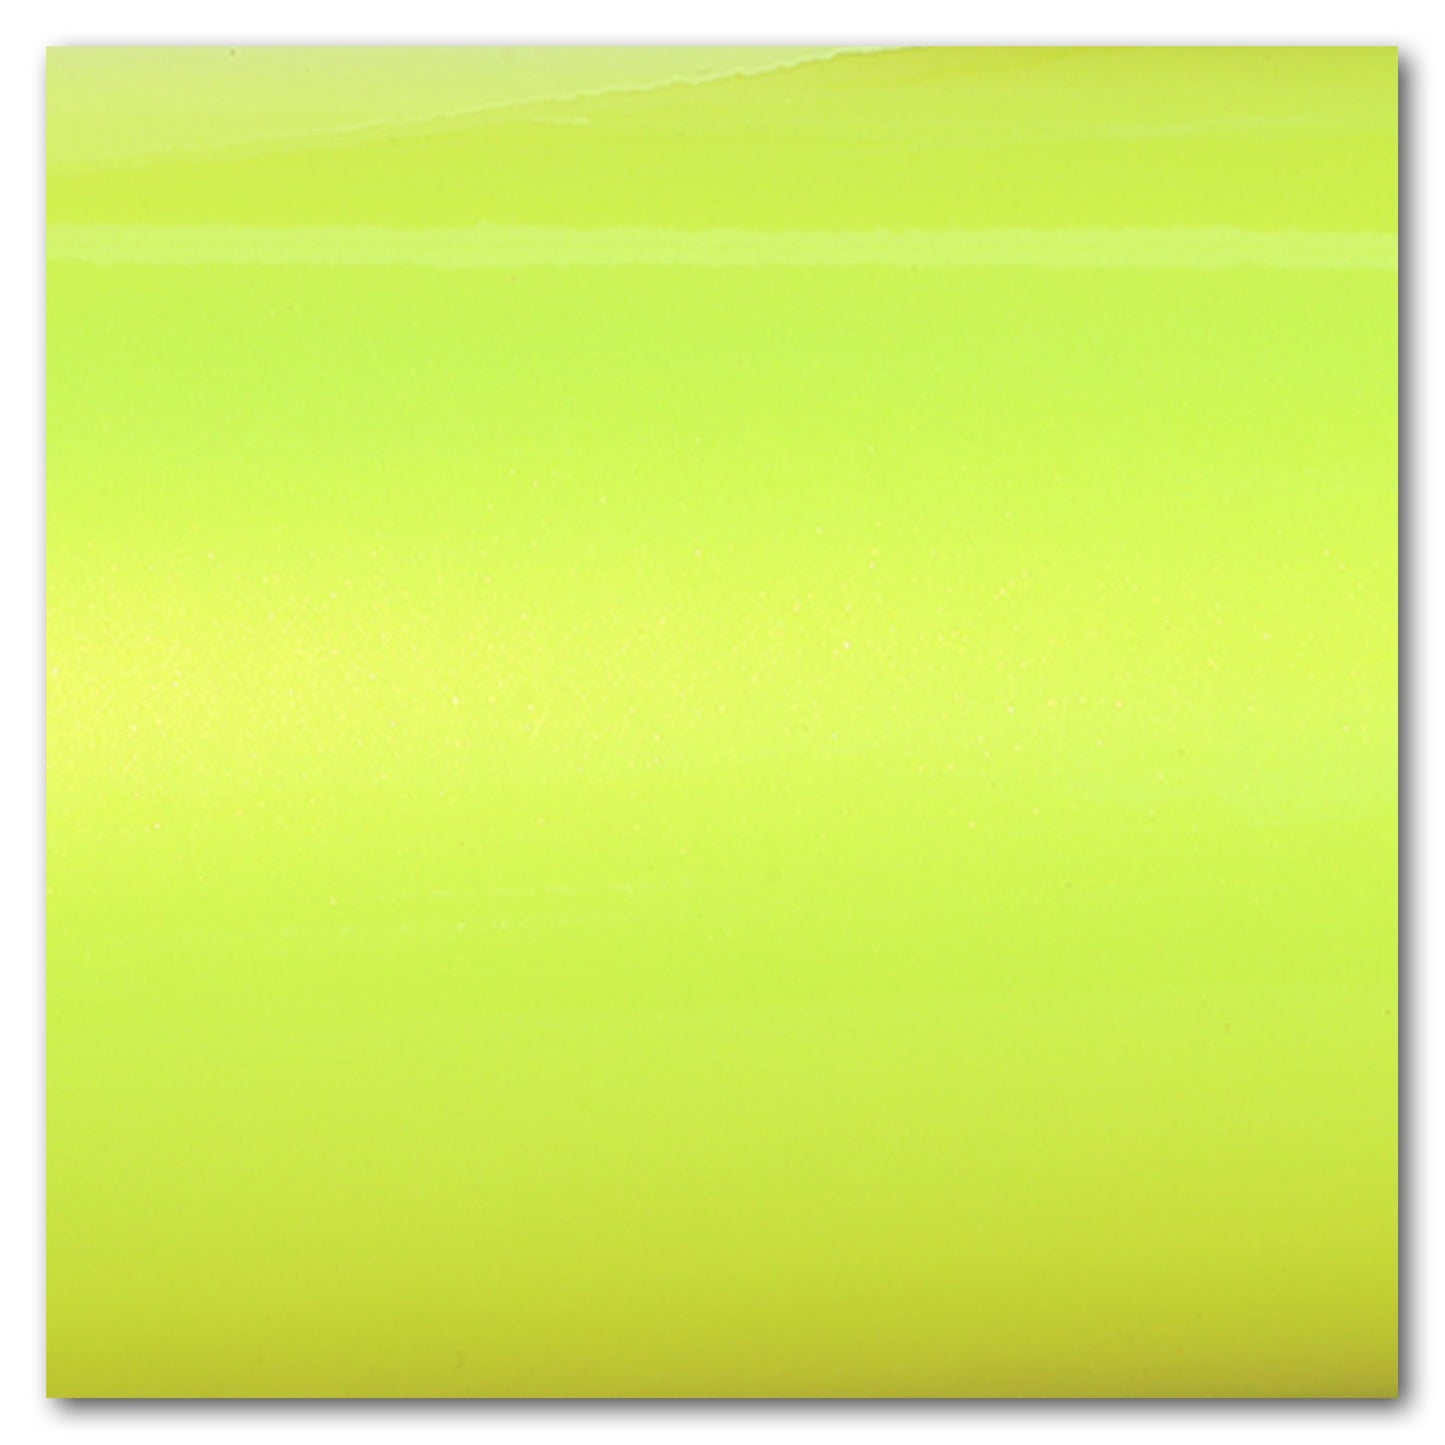 Space Gold Neon Yellow